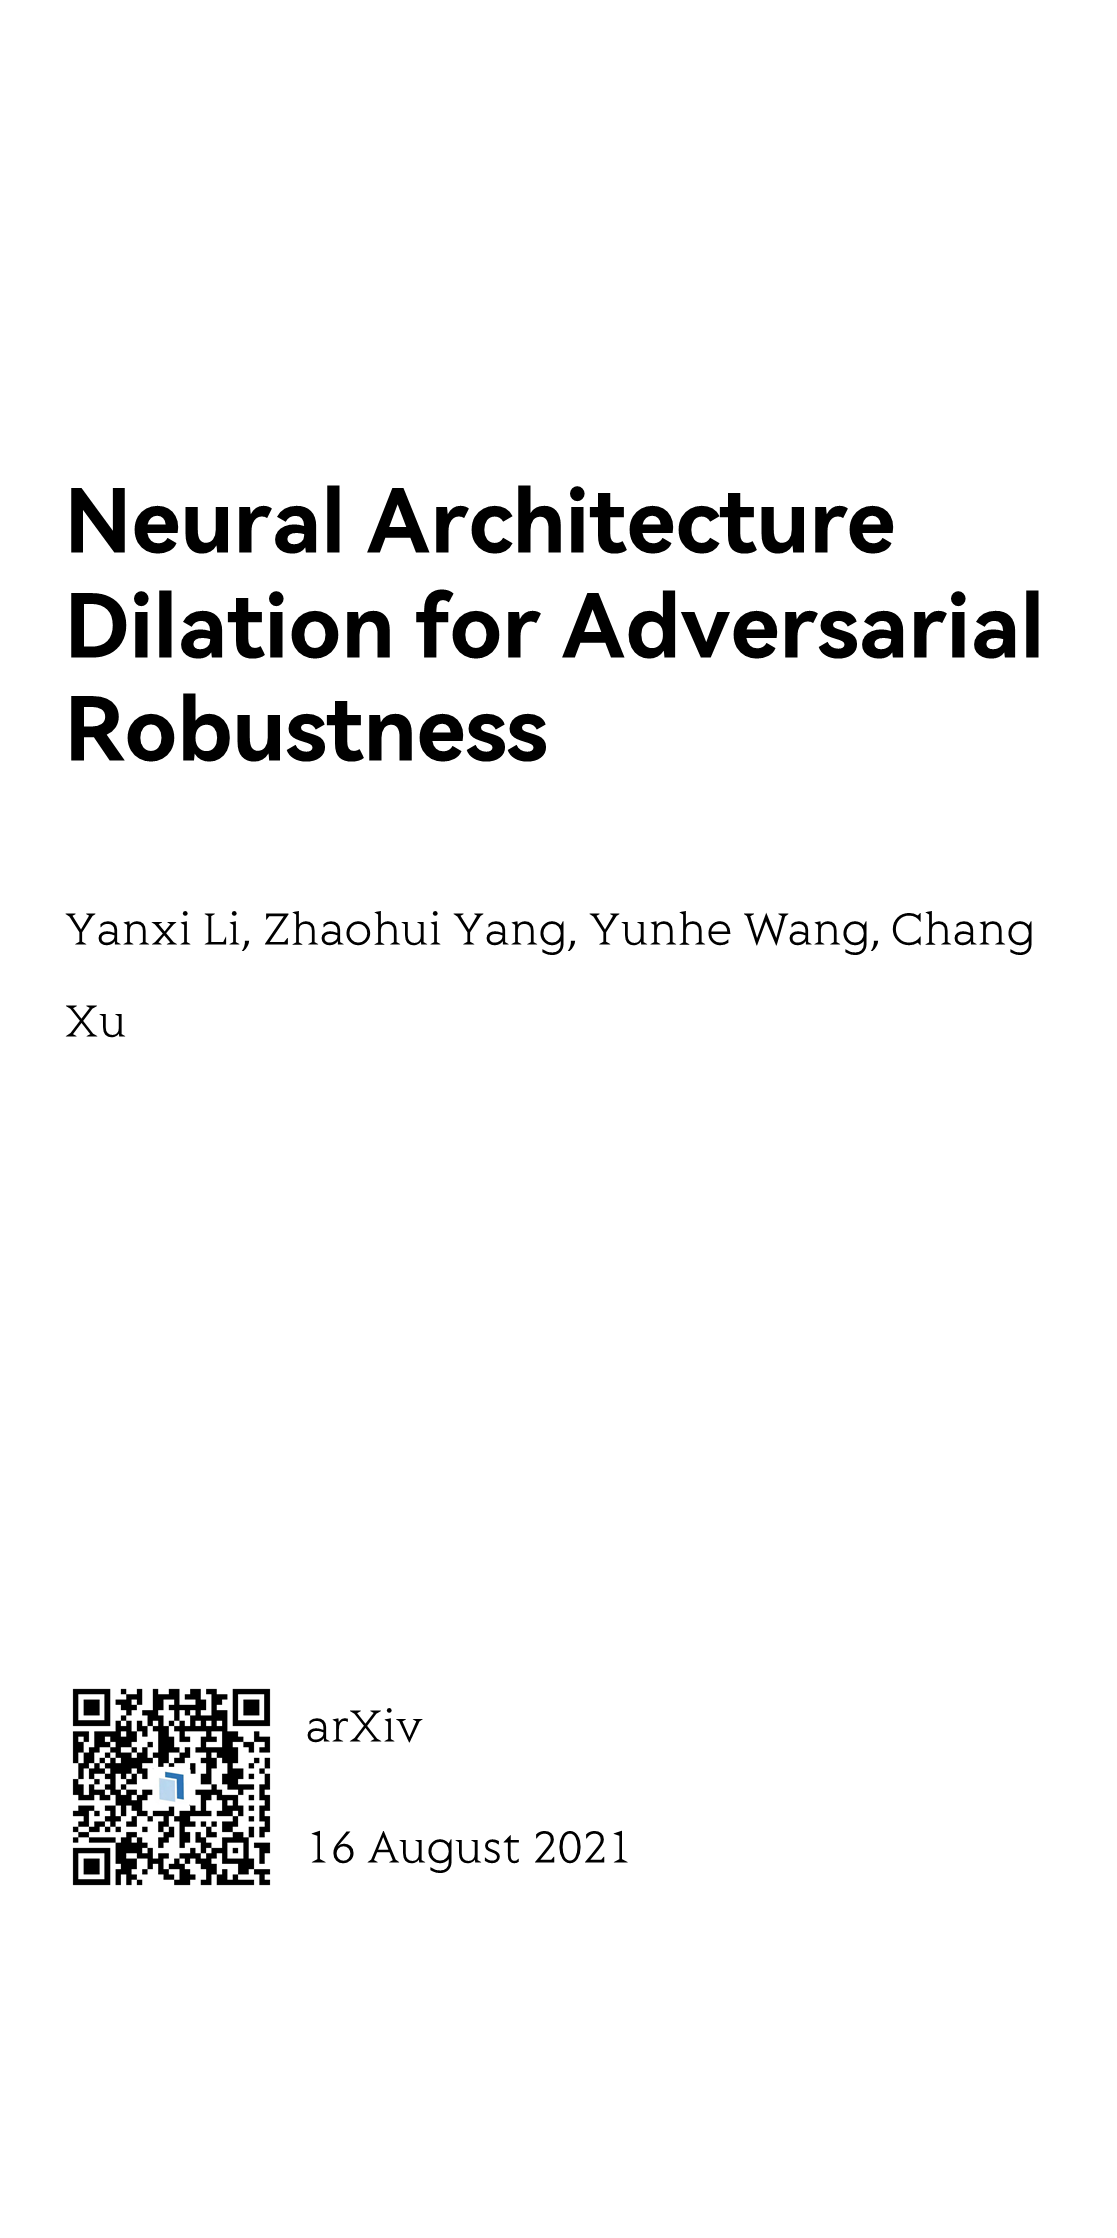 Neural Architecture Dilation for Adversarial Robustness_1